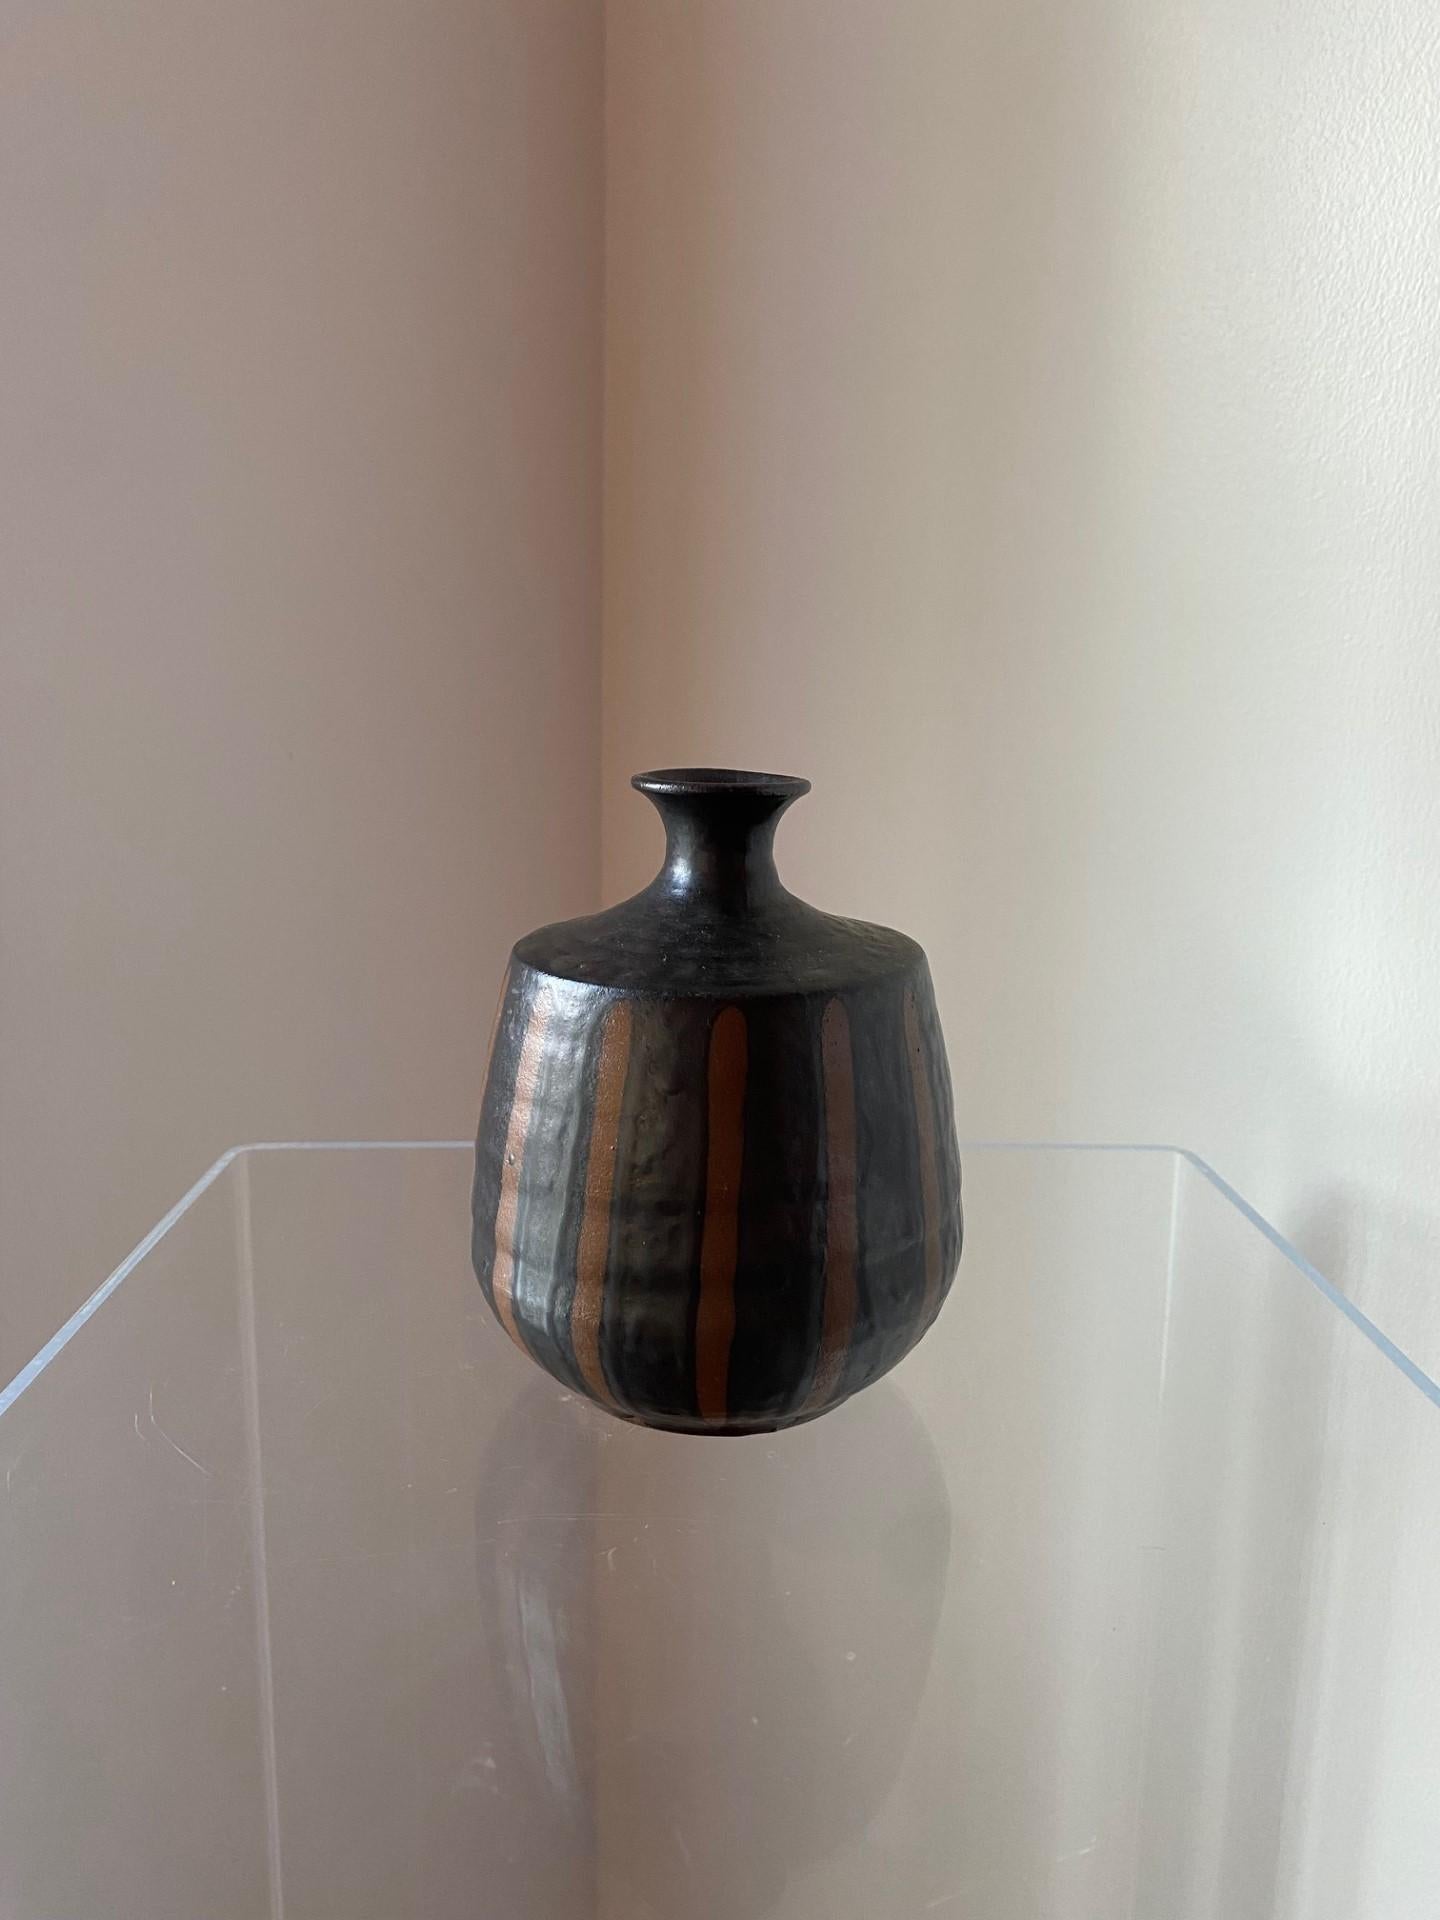 Beautiful stoneware ceramic vase by creative decorative co inc, made in Japan. Signed noi chips or cracks.   Beautiful piece that is timeless and unique.